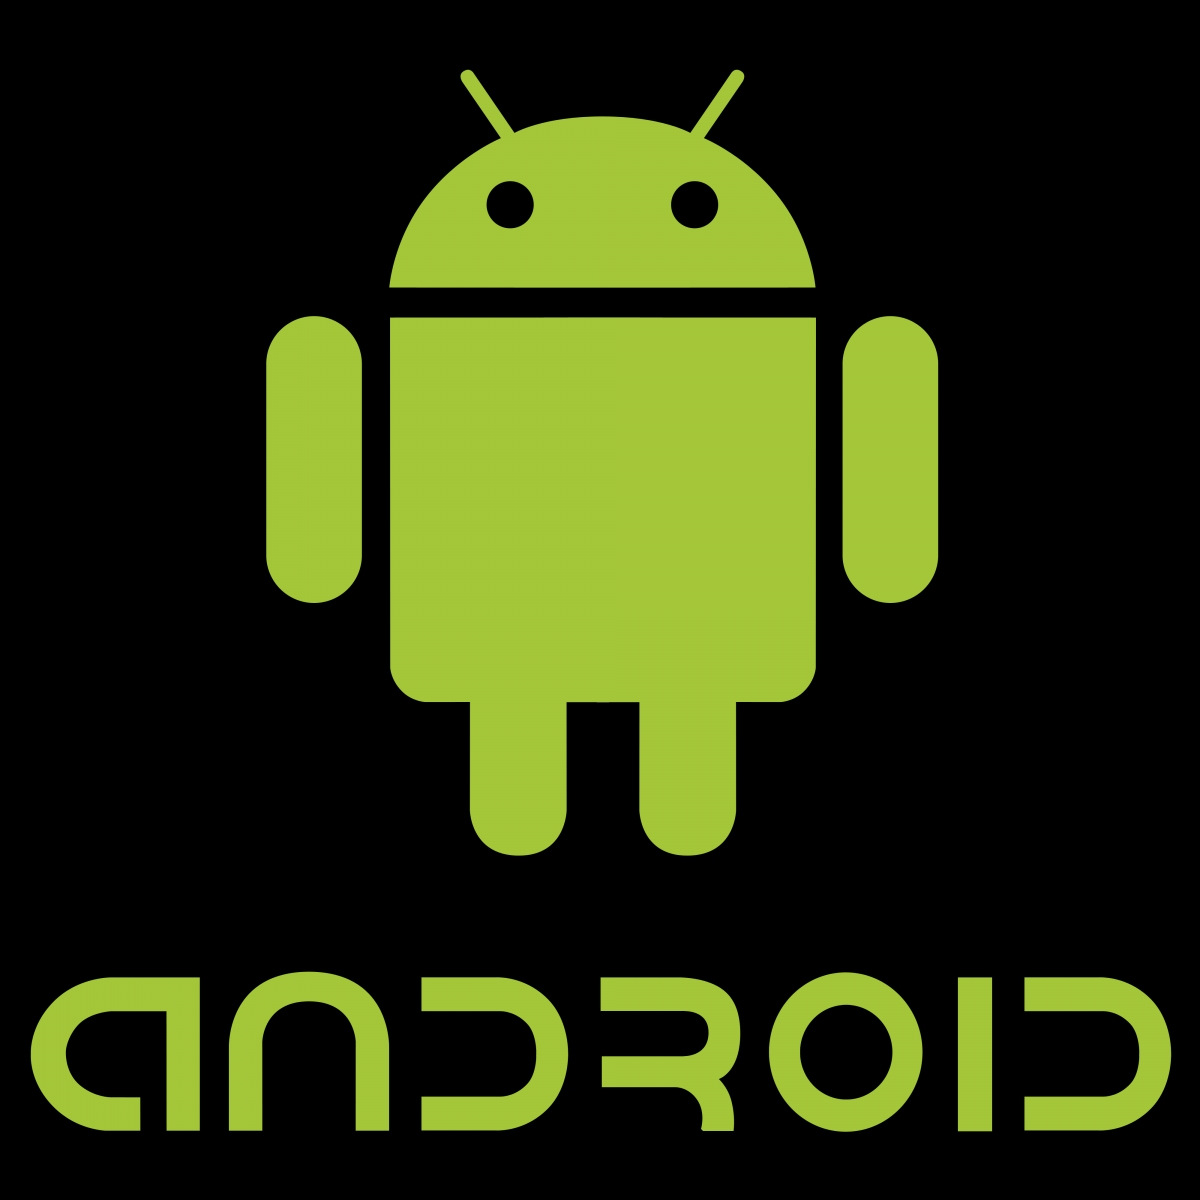 Android s android t. Андроид. Иконка андроид. Значок Android. Андро.